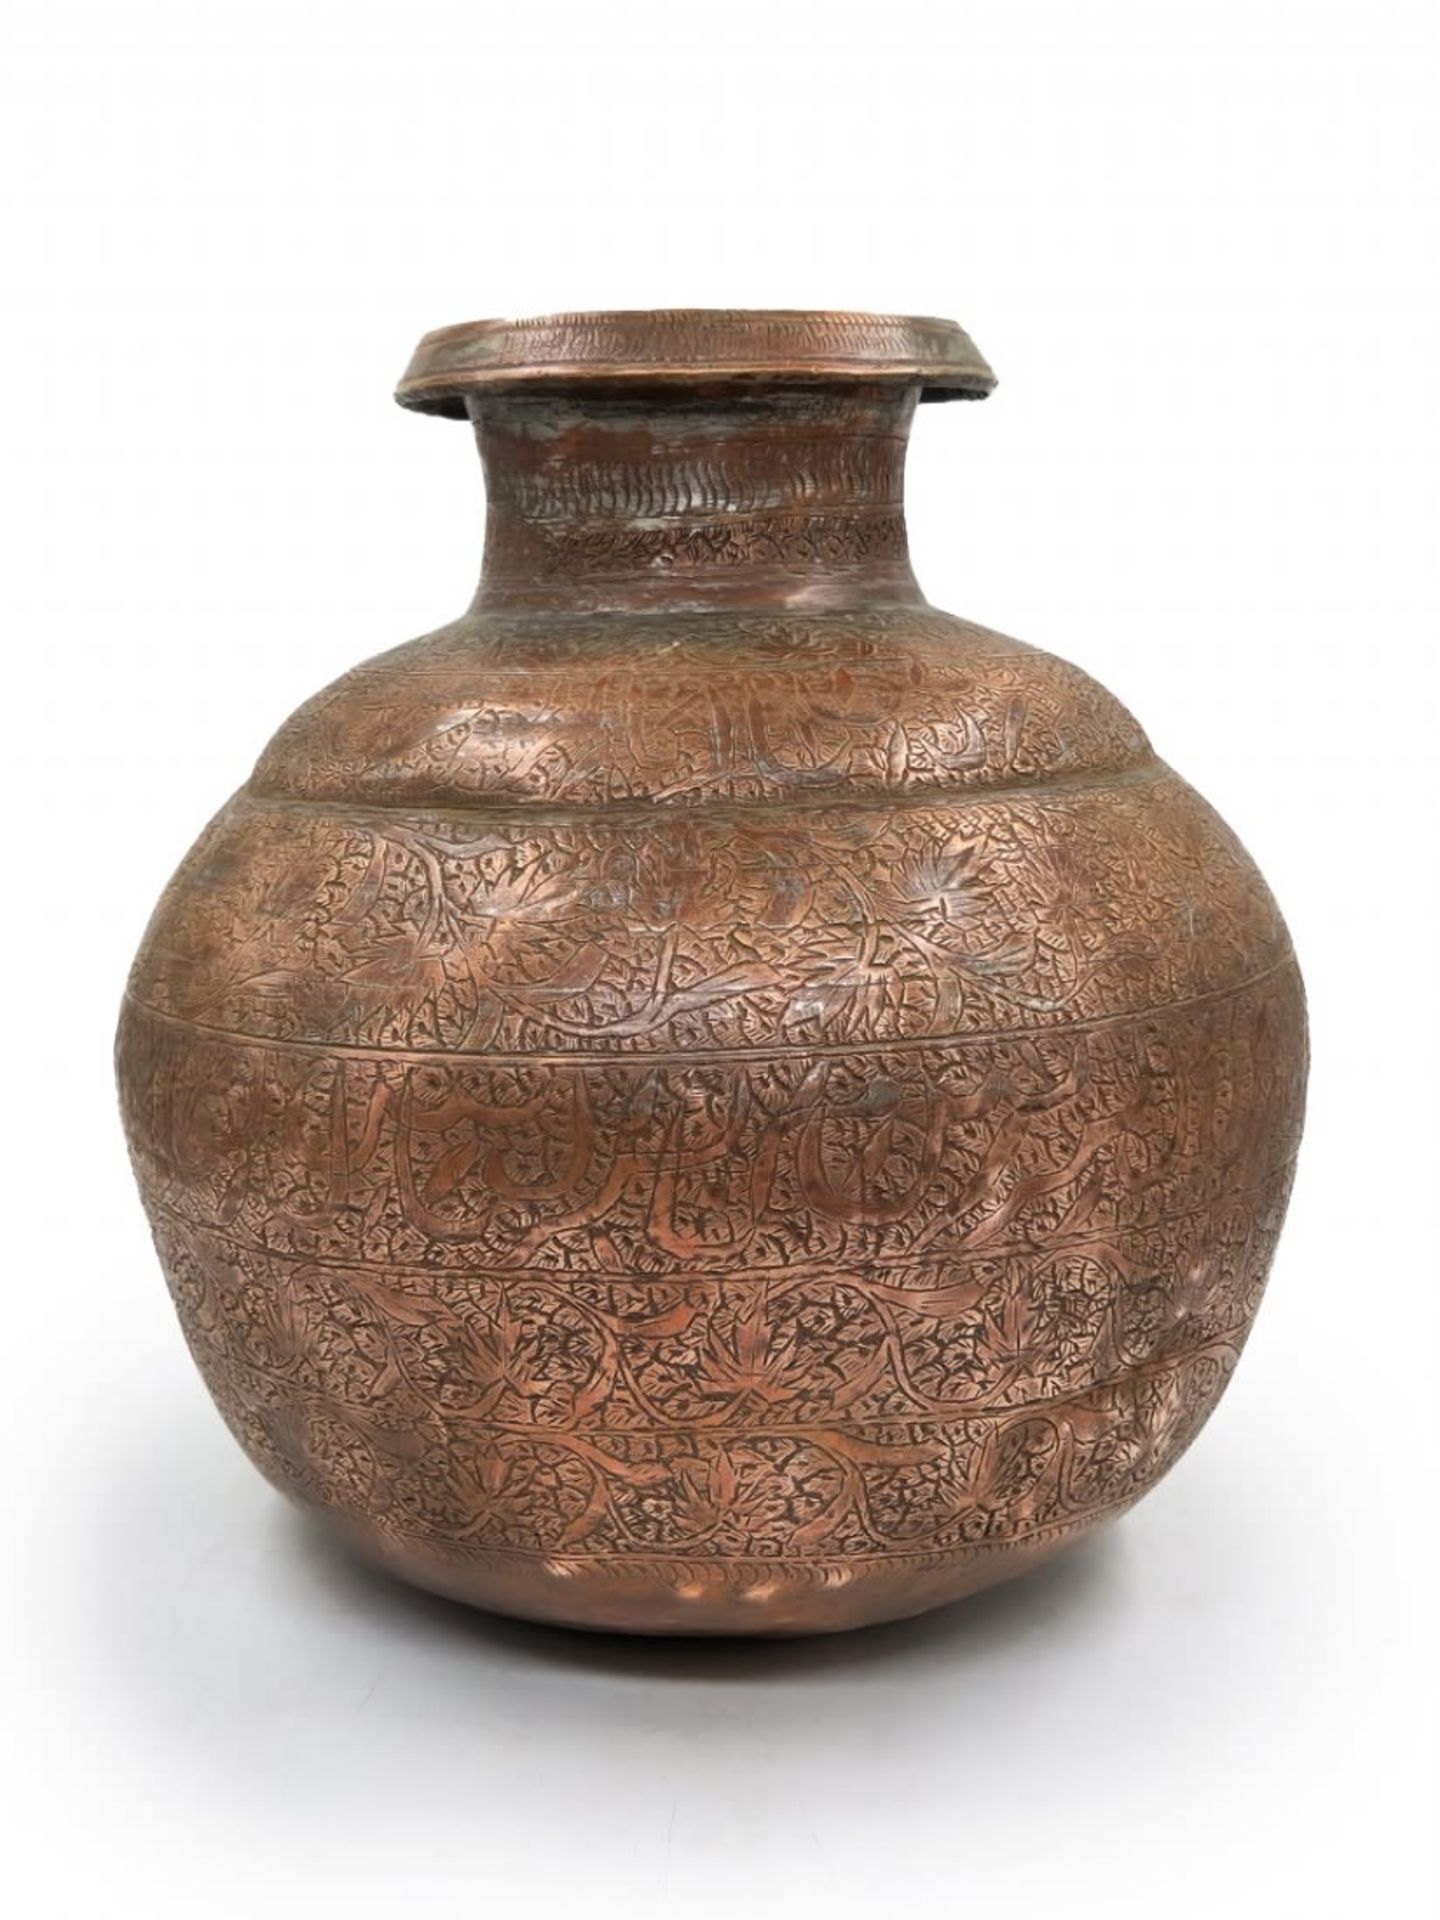 A large and beautiful antique Asian water jug from the 19th century, made in the Dhamrai region, - Image 3 of 8